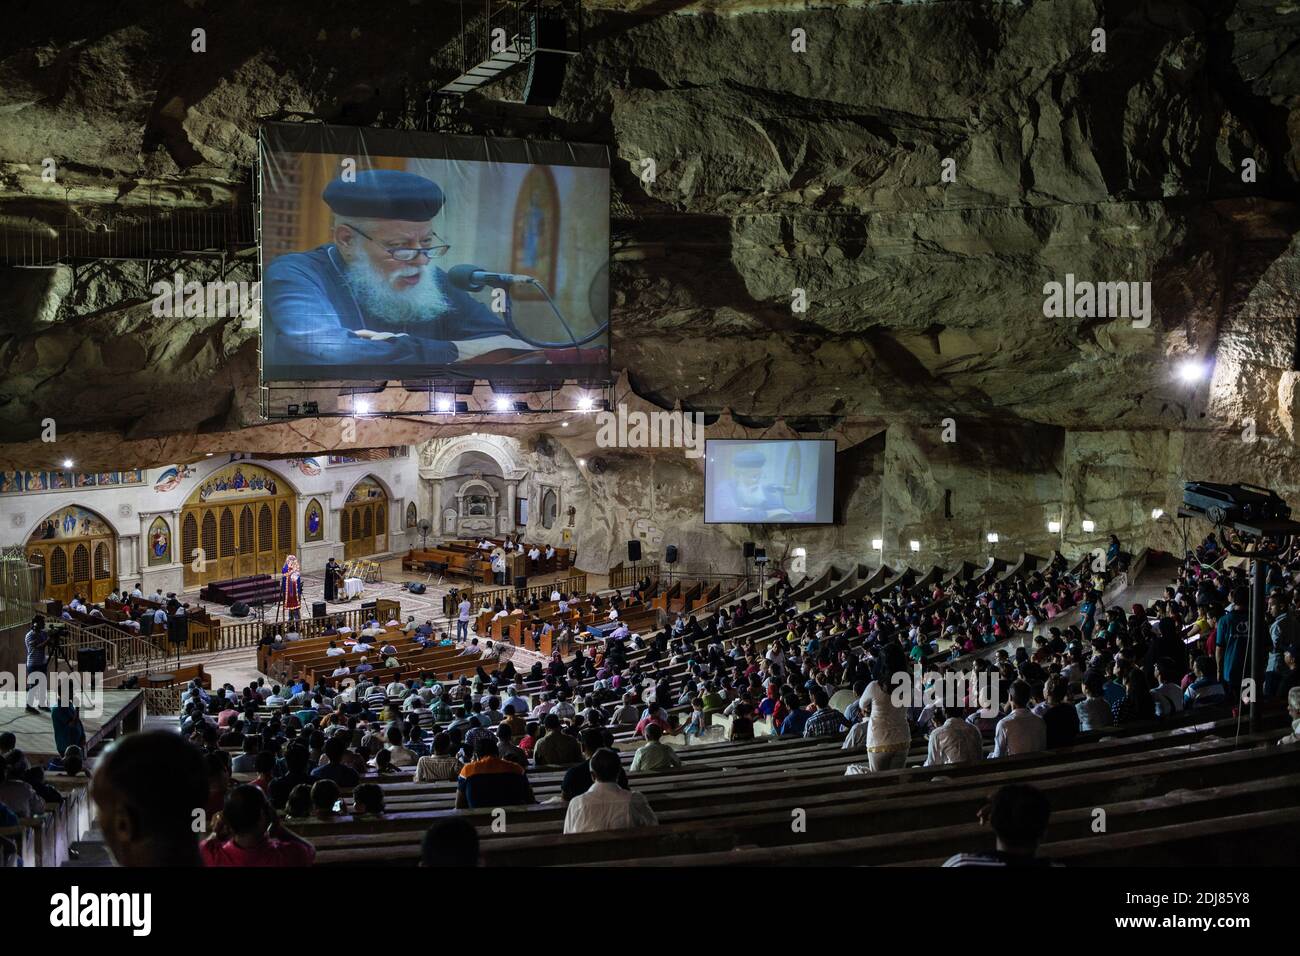 NO WEB/NO APPS - Worshippers attend a service as Coptic priest Father Samaan Ibrahim reads his sermon at the Saint Samaan (Simon) Church also known as the Cave Church in the Mokattam village, nicknamed as “Garbage City,” in Cairo, Egypt on August 19, 2016. Once a week hundreds of Muslims gather at the church after the prayer, to attend a session of exorcism performed by the priest. With a cross and holy water he fights spiritual entities and demons. The Monastery has an amphitheater with a seating capacity of 20,000 making it the largest Christian church in the Middle East. It is named after t Stock Photo